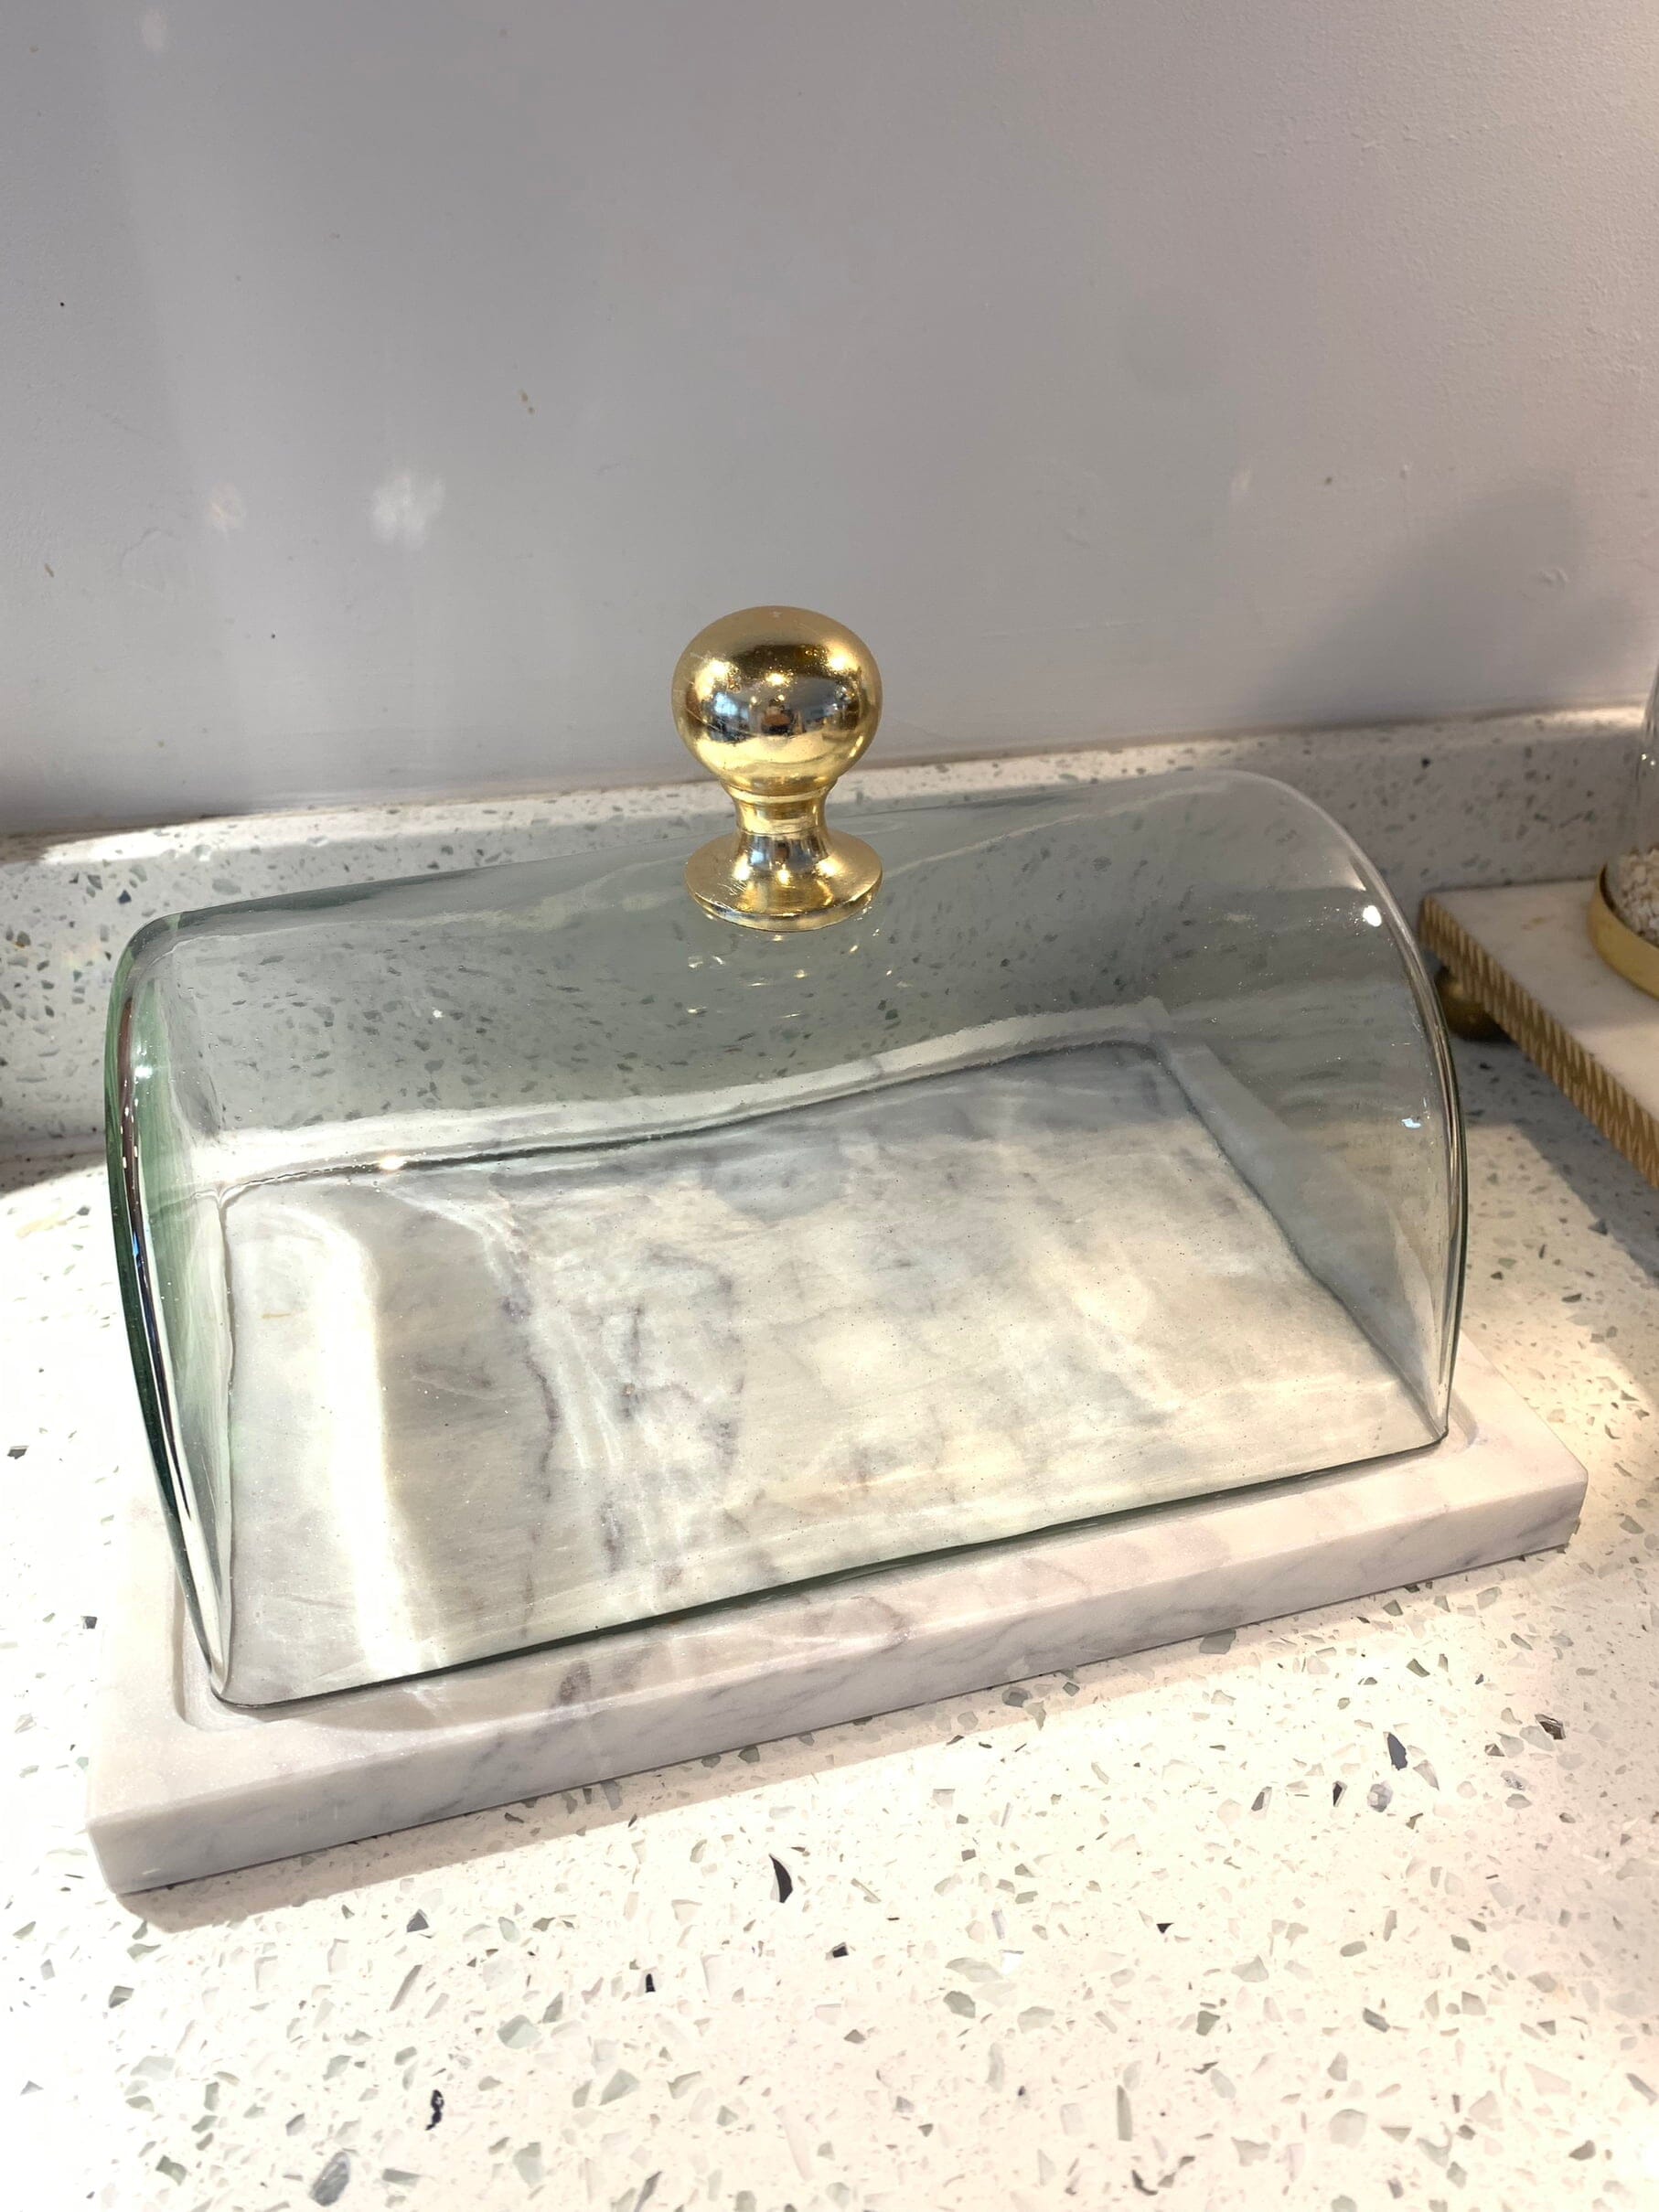 Rectangular Marble Cake Tray with Glass Dome – High Class Touch